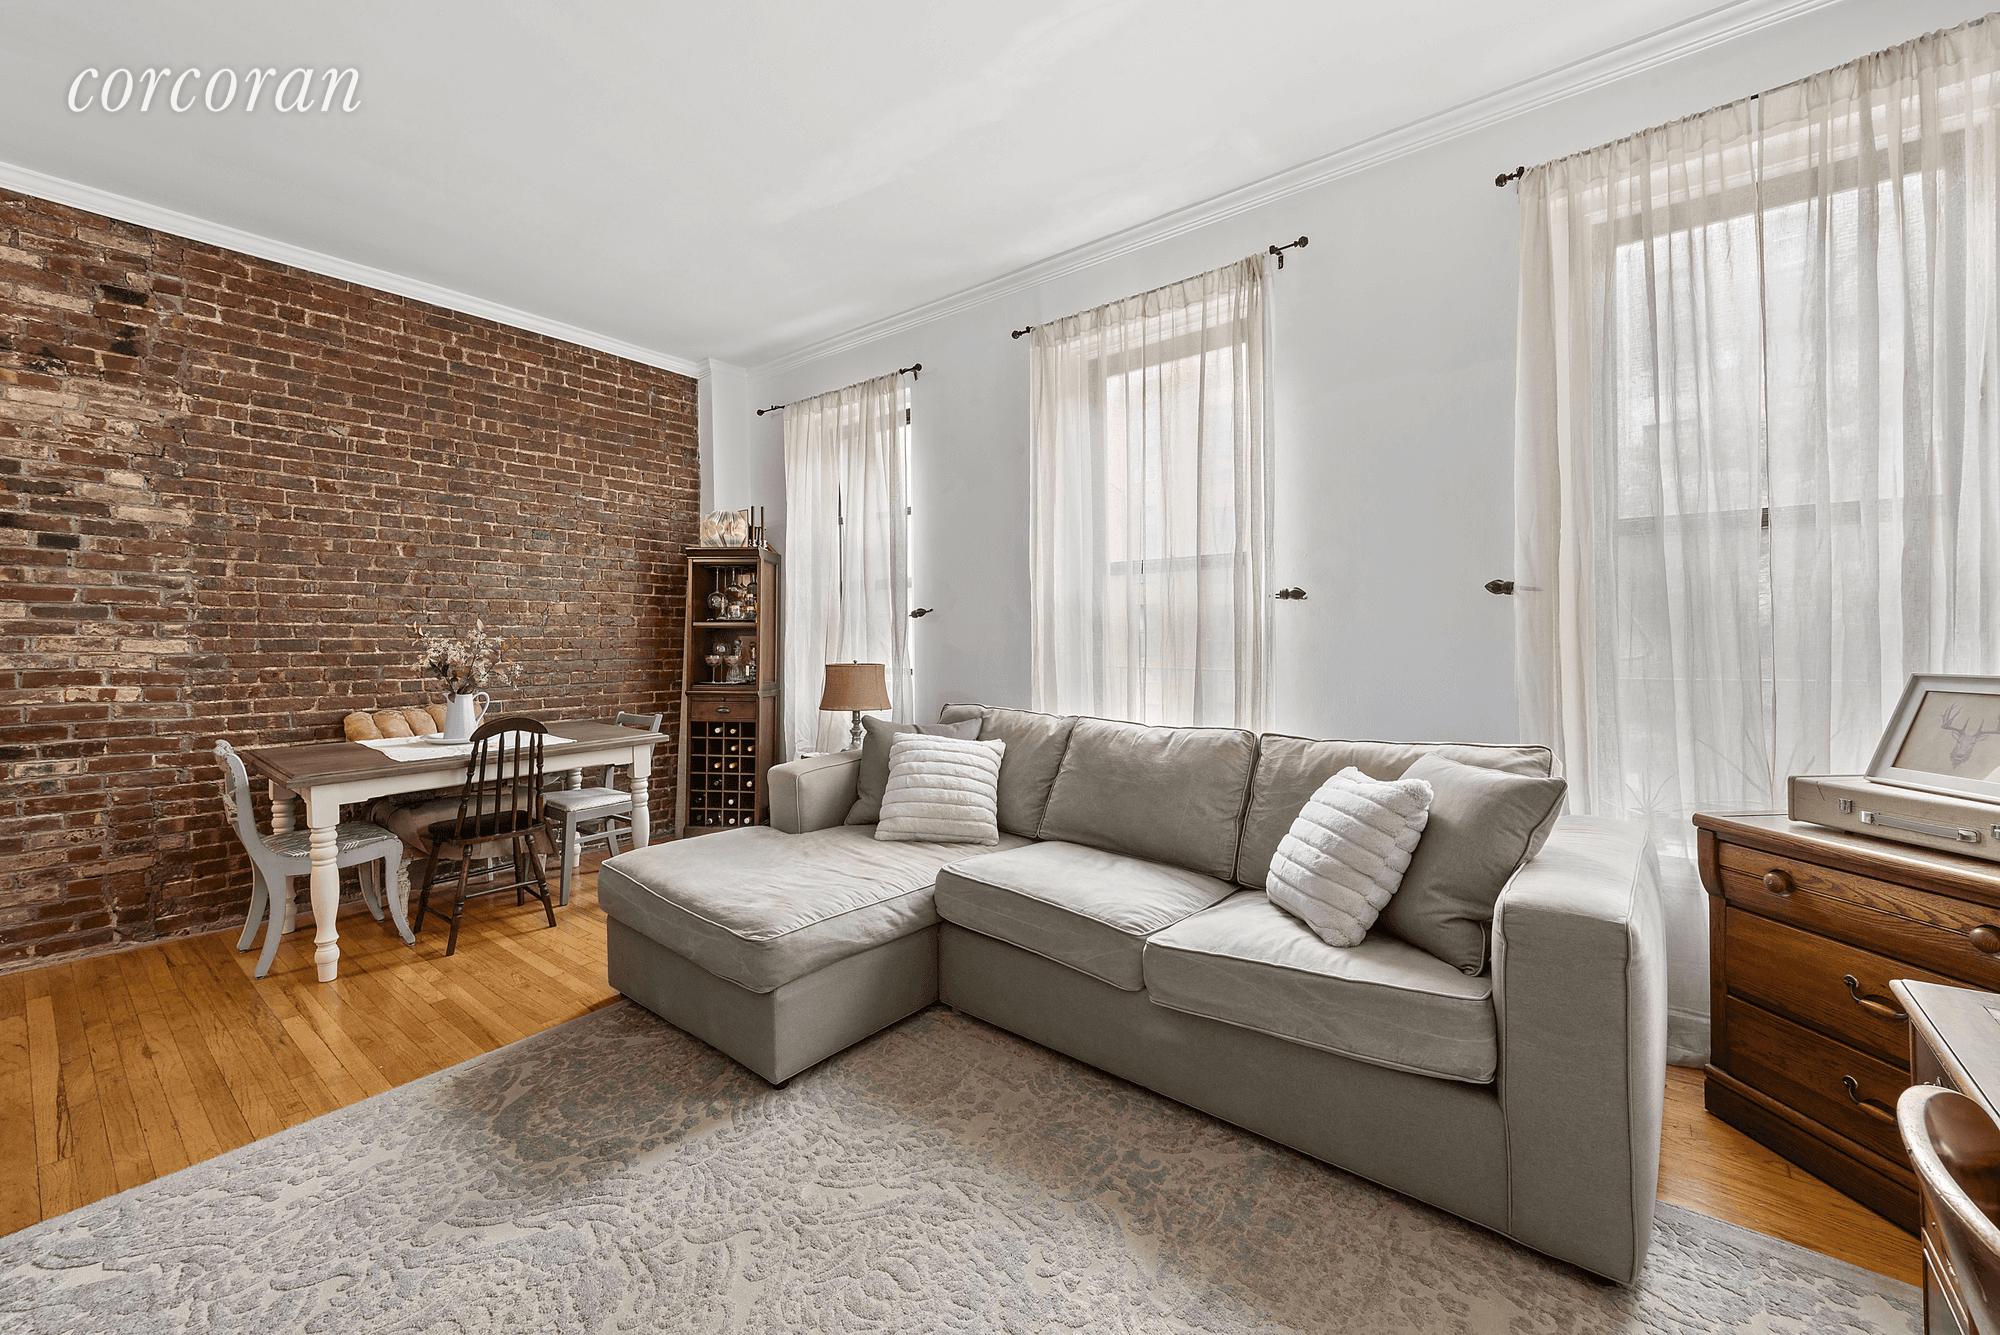 New to market ! ! ! Spacious one bedroom apartment with high ceilings, exposed brick walls, hardwood floors, good size windowed kitchen, king size bedroom and 3 large windows in ...